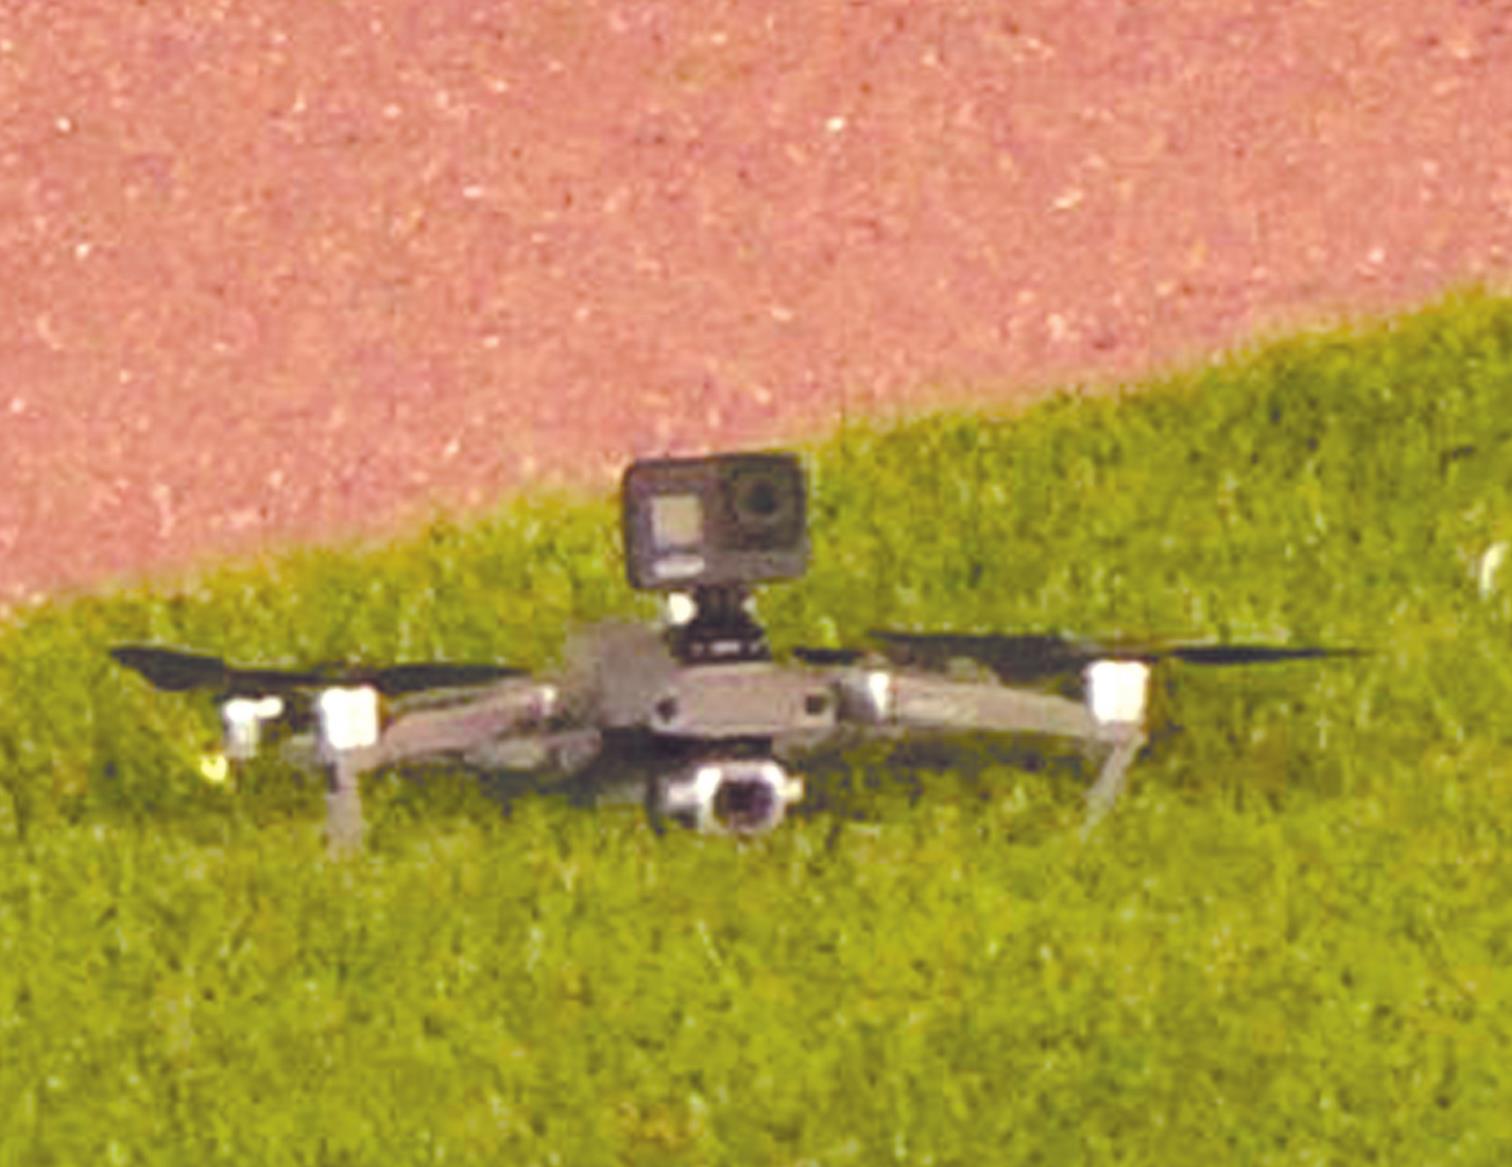 A small drone landed in Wrigley Field during the game Wednesday. Provided